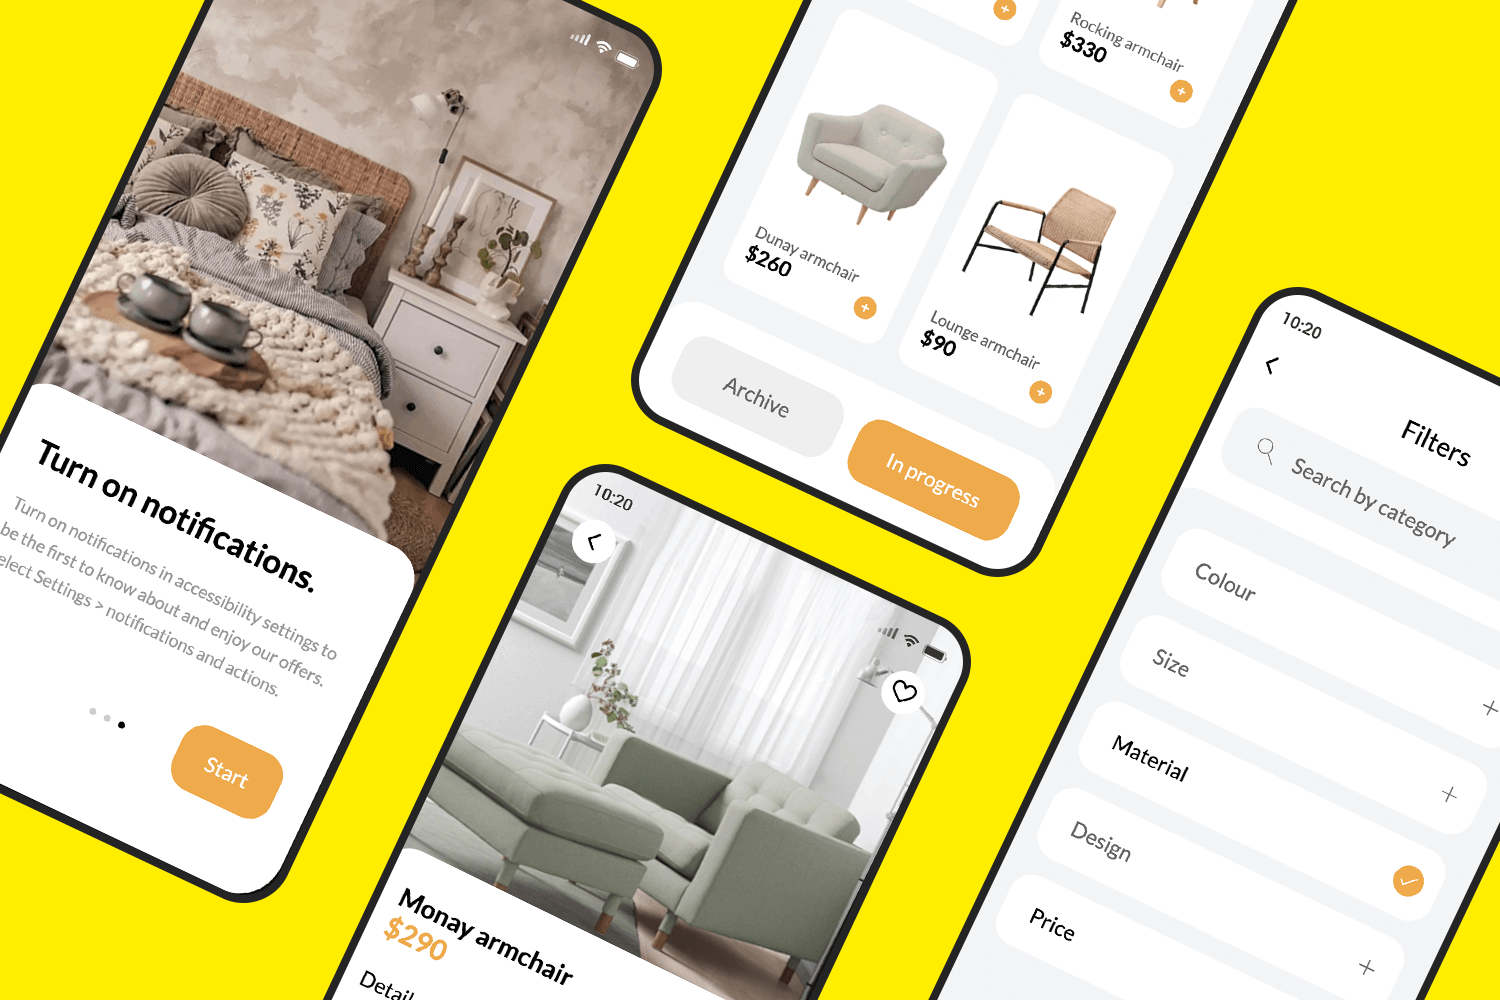 Mobile store app showcasing furniture products, notification settings, and filter options